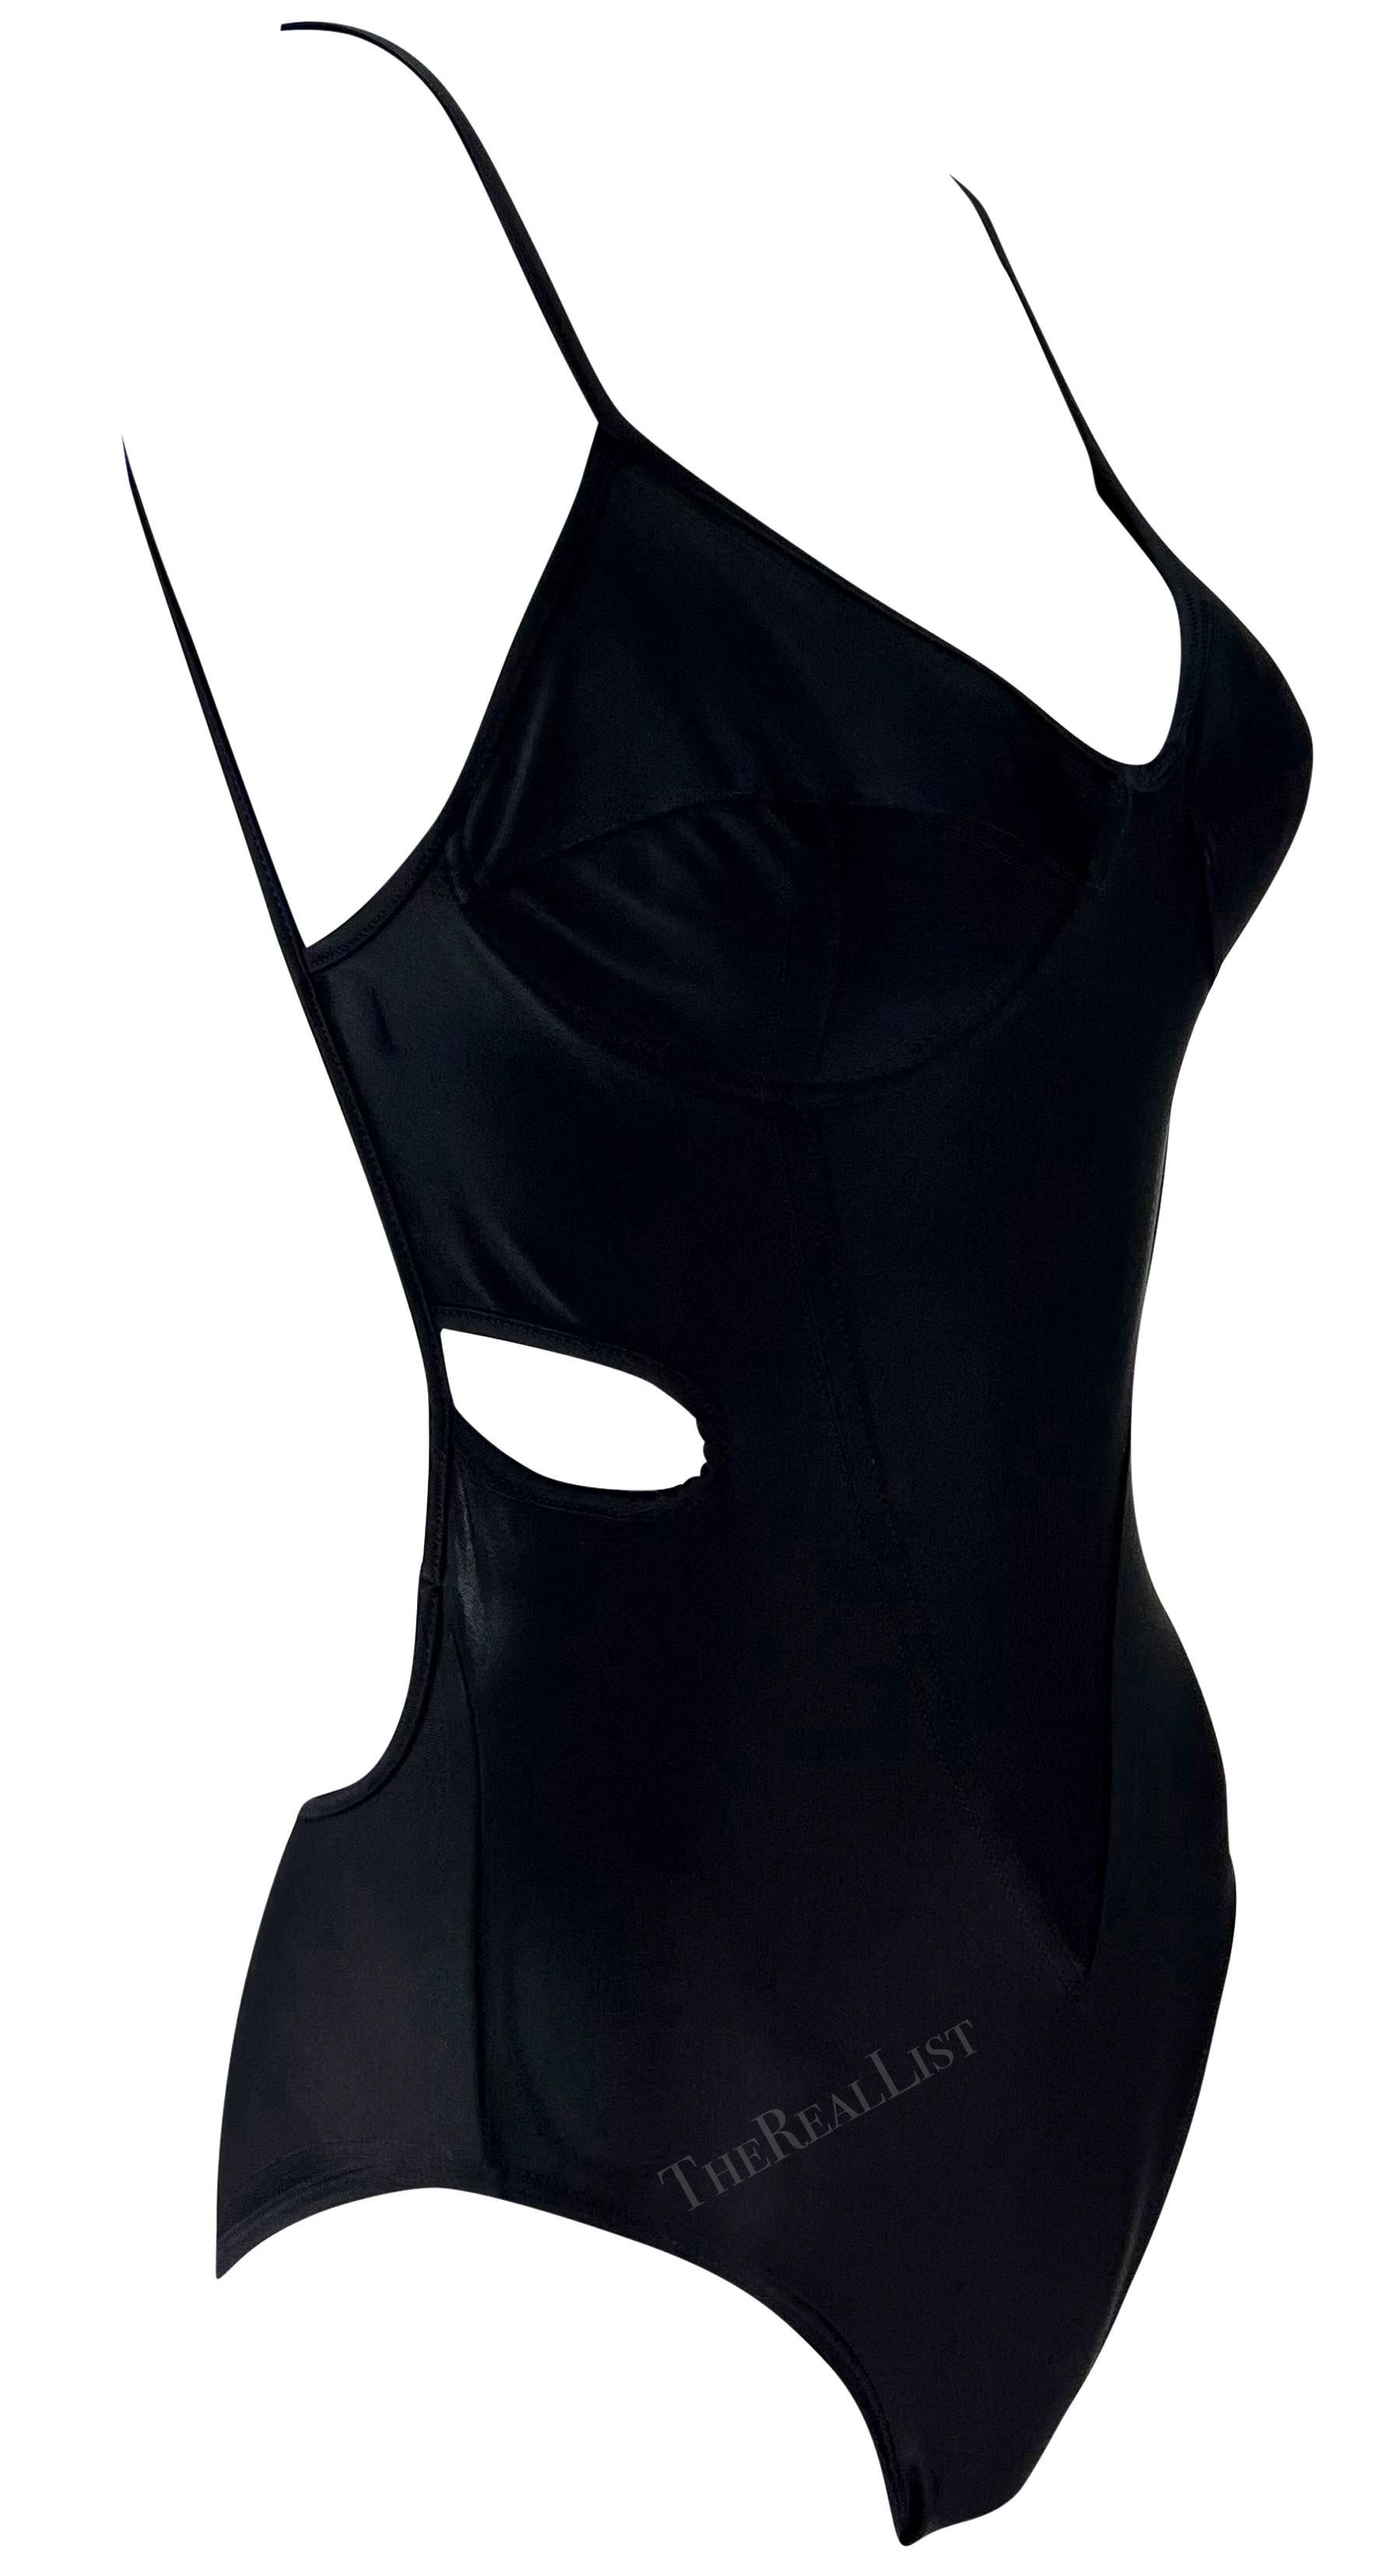 Early 1990s John Galliano Black Cut Out One Piece Swimsuit/Bodysuit In Excellent Condition For Sale In West Hollywood, CA